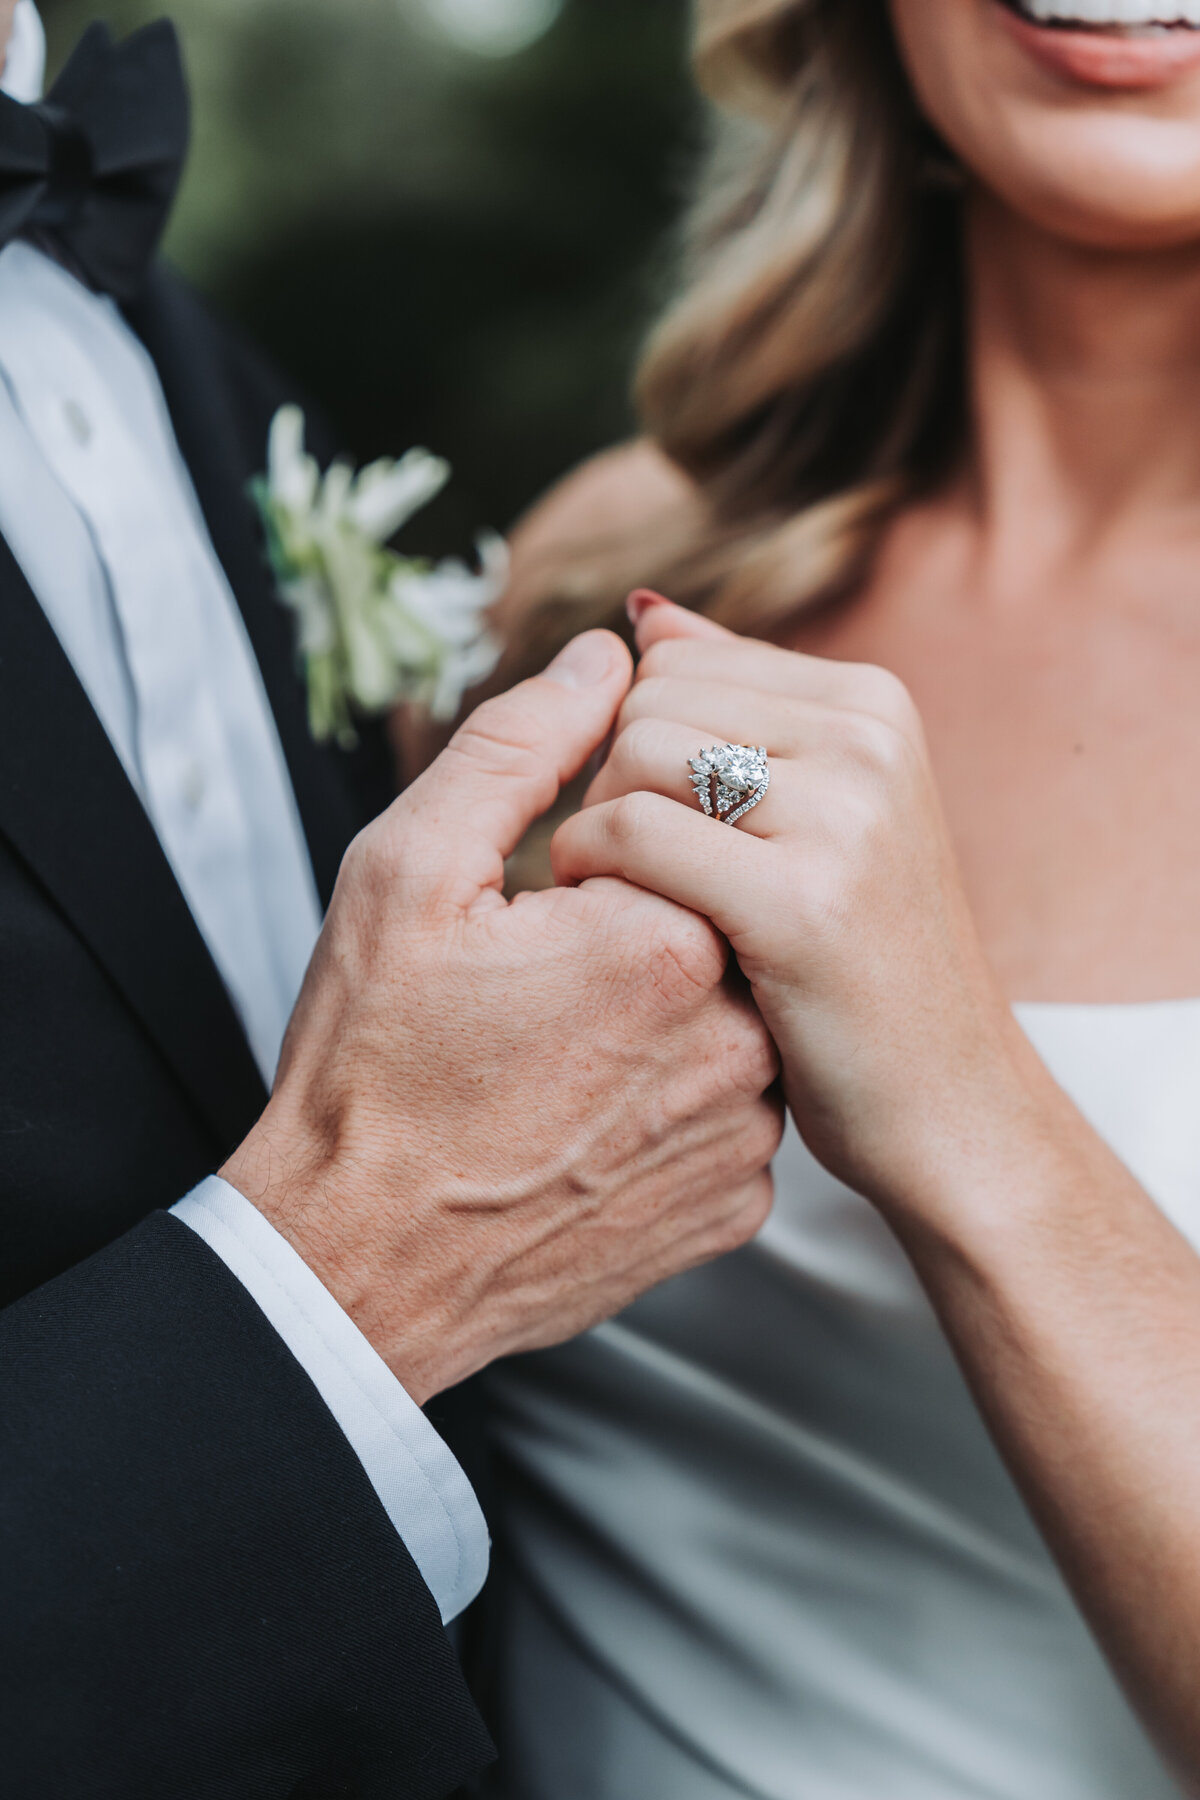 Groom holds bride's hand and shows wedding ring